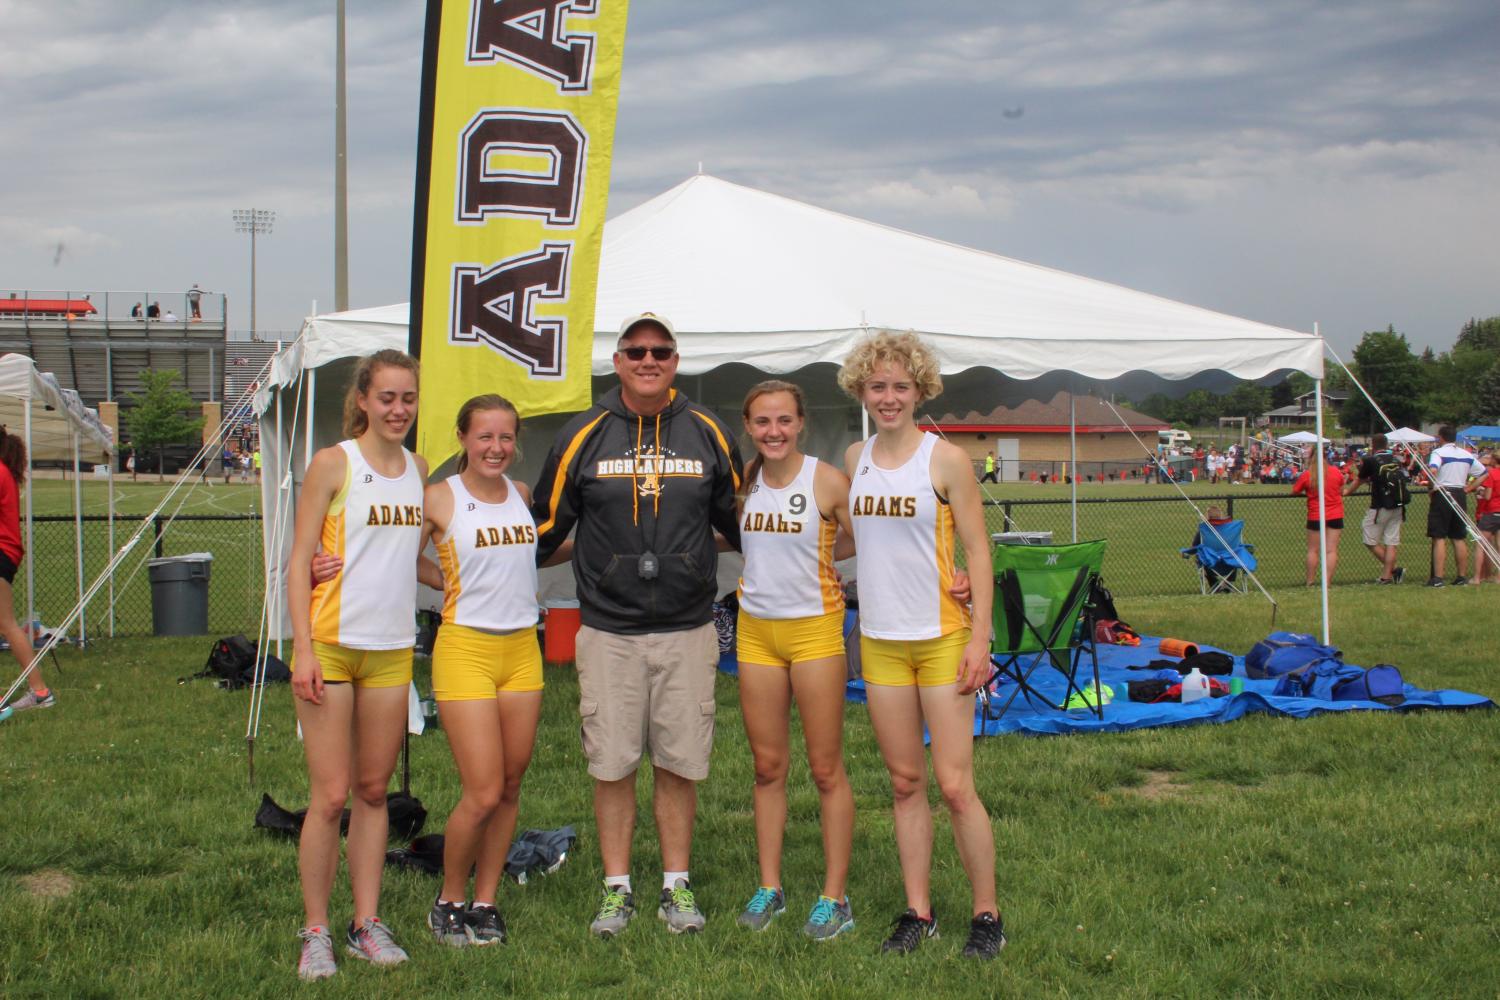 The 4x800m relay team (from left to right, junior Eva Jahnson, senior Hannah Champine, junior Maddie Dessy, and senior Carola Jahnson) pose with Coach Gary Inman at the Division One State Finals meet.